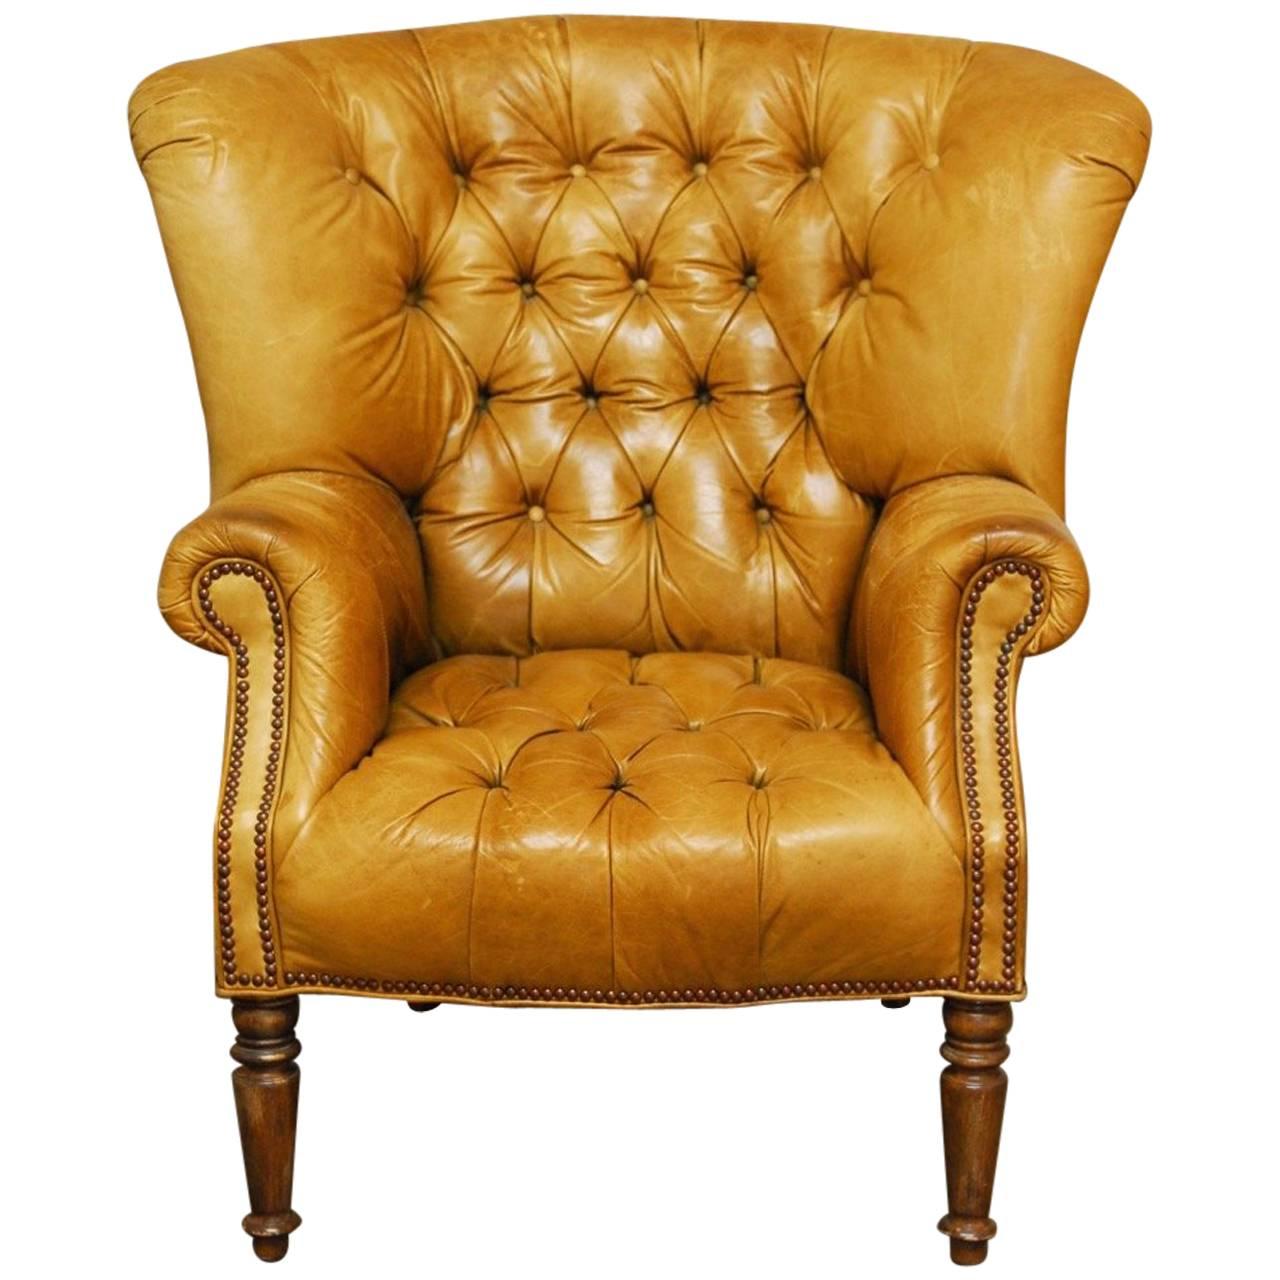 Georgian English Tufted Leather Chesterfield Library Chair or Wingback